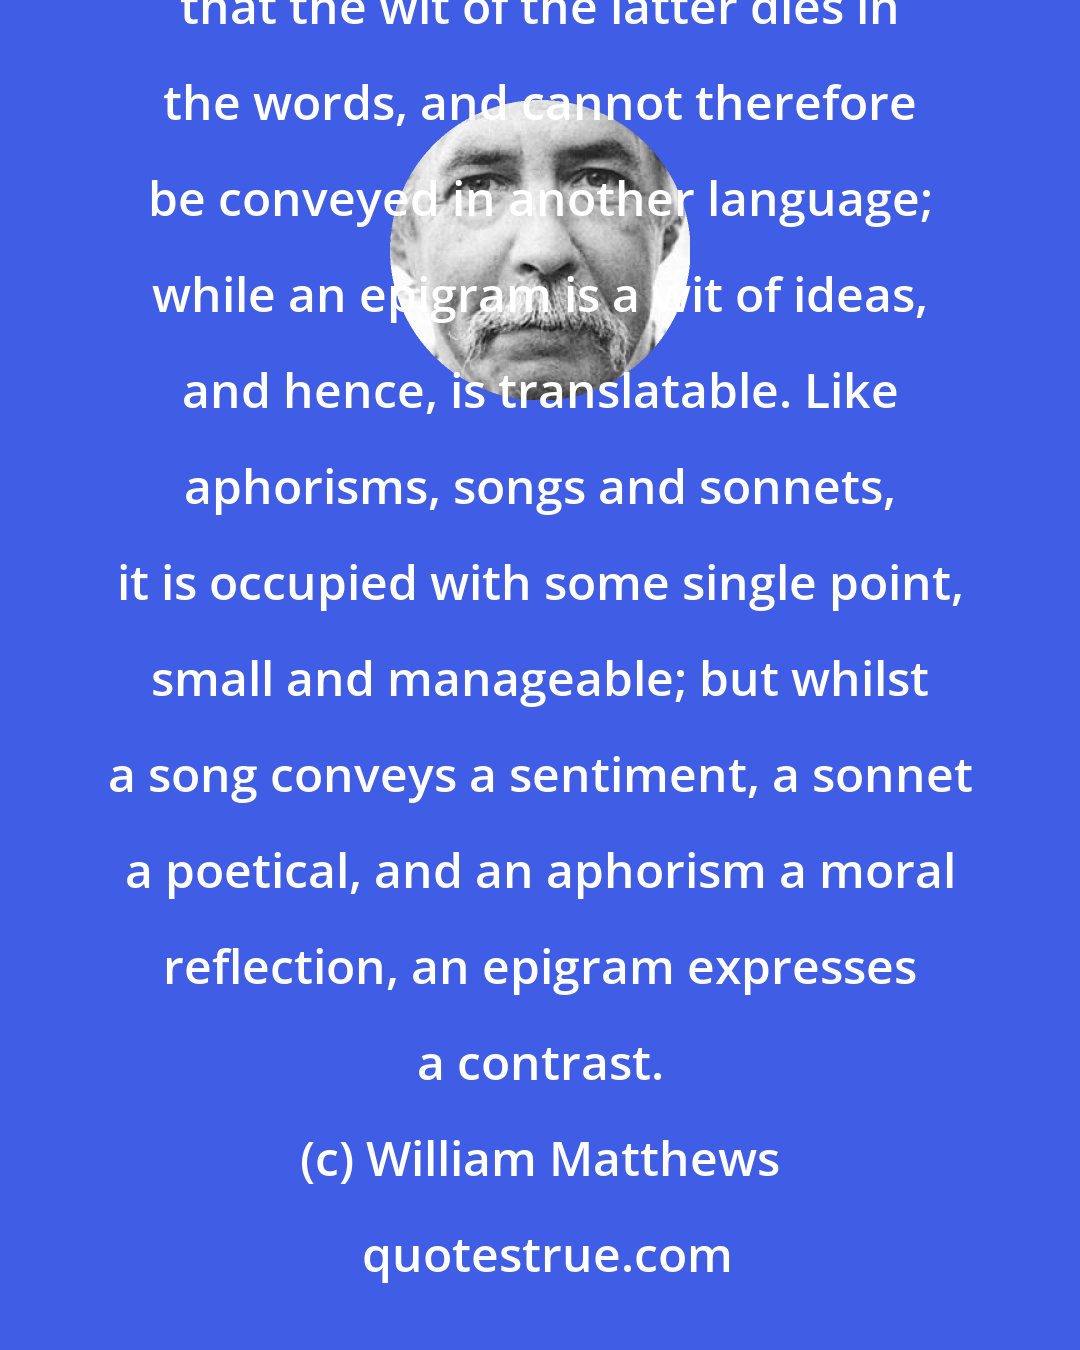 William Matthews: What are the precise characteristics of an epigram it is not easy to define. It differs from a joke, in the fact that the wit of the latter dies in the words, and cannot therefore be conveyed in another language; while an epigram is a wit of ideas, and hence, is translatable. Like aphorisms, songs and sonnets, it is occupied with some single point, small and manageable; but whilst a song conveys a sentiment, a sonnet a poetical, and an aphorism a moral reflection, an epigram expresses a contrast.